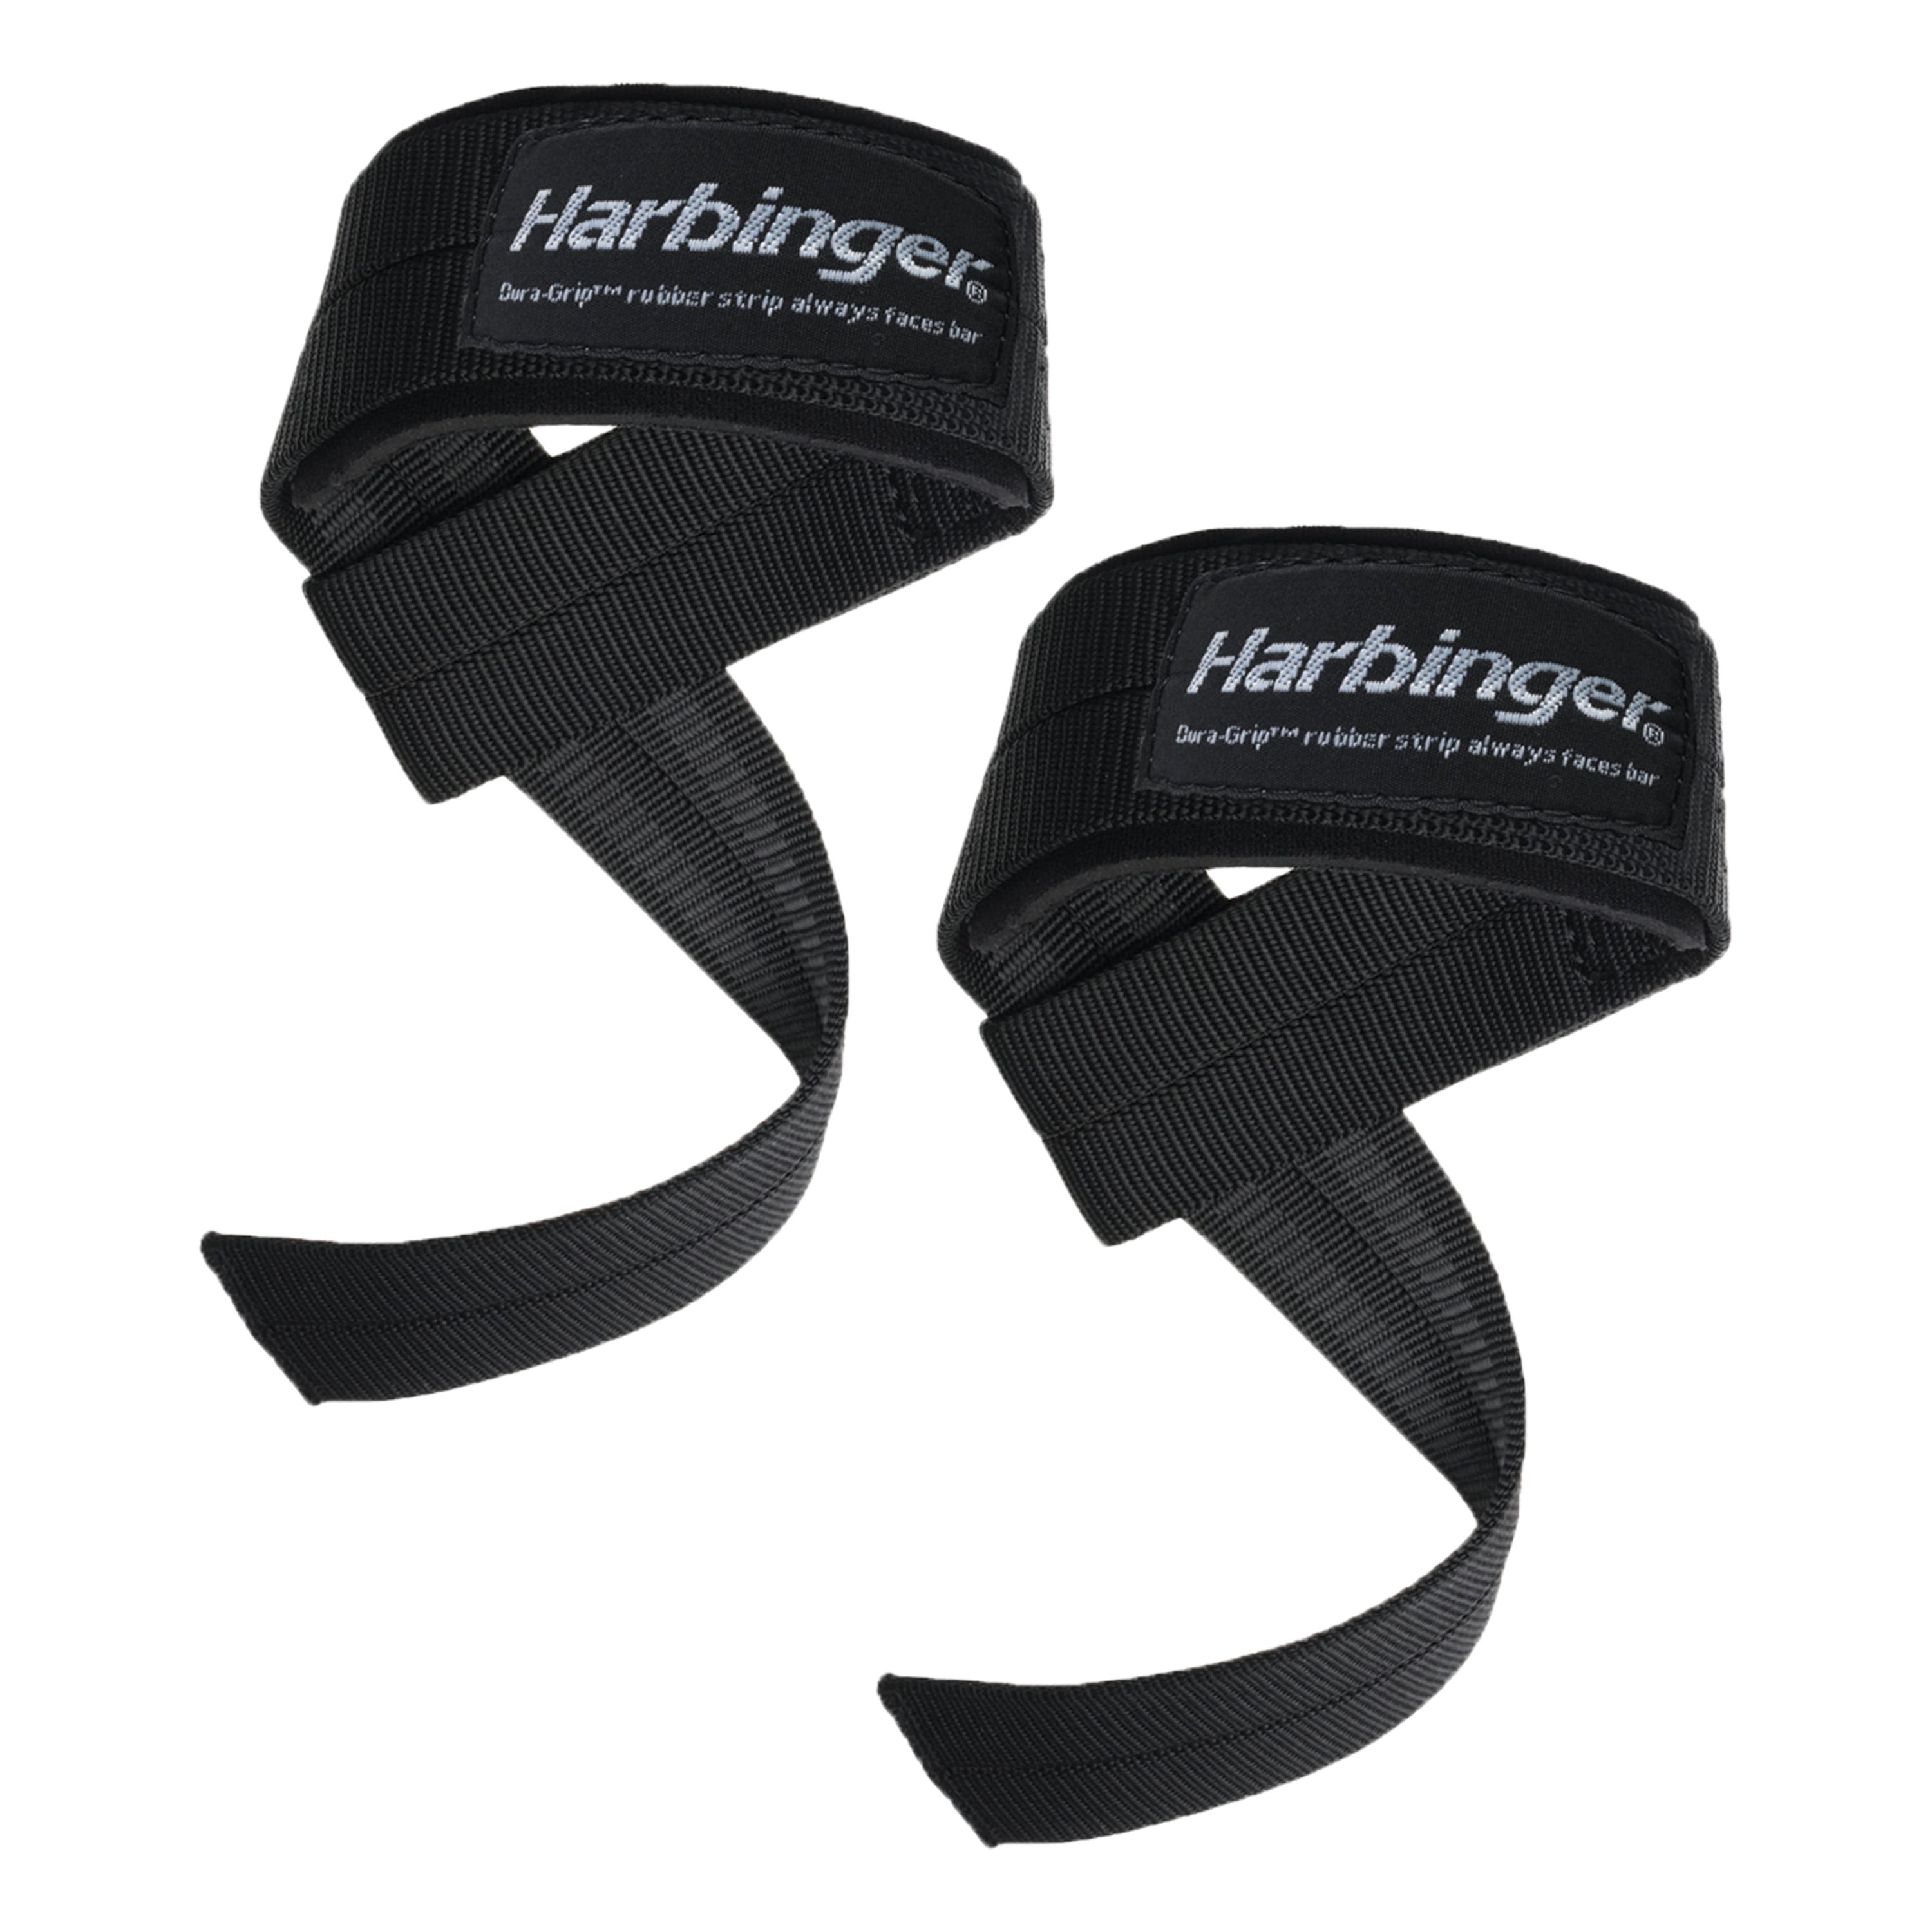 Harbinger Cotton Weight Lifting Straps 20 1/2 inch x 1 1/2 inch New Old Stock 